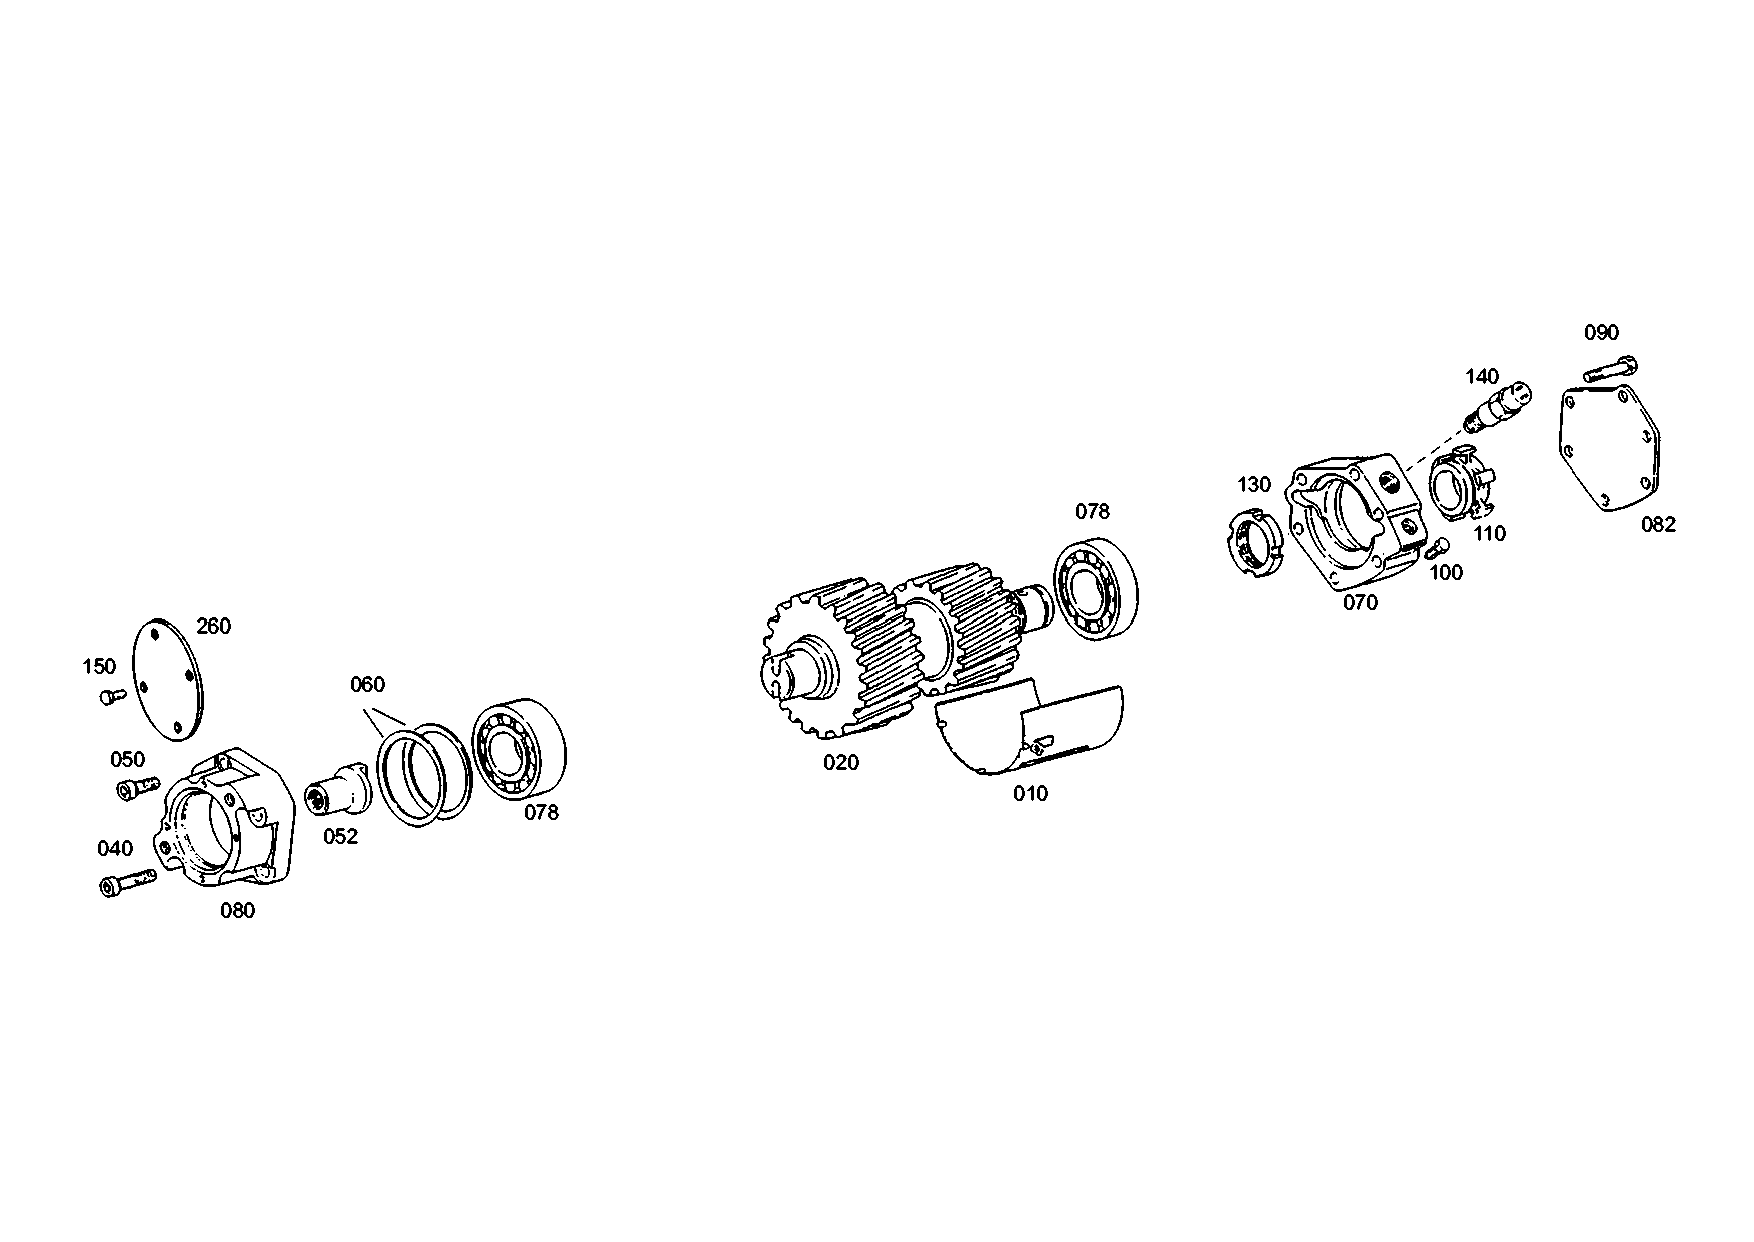 drawing for SCANIA 1404536 - CYL. ROLLER BEARING (figure 3)